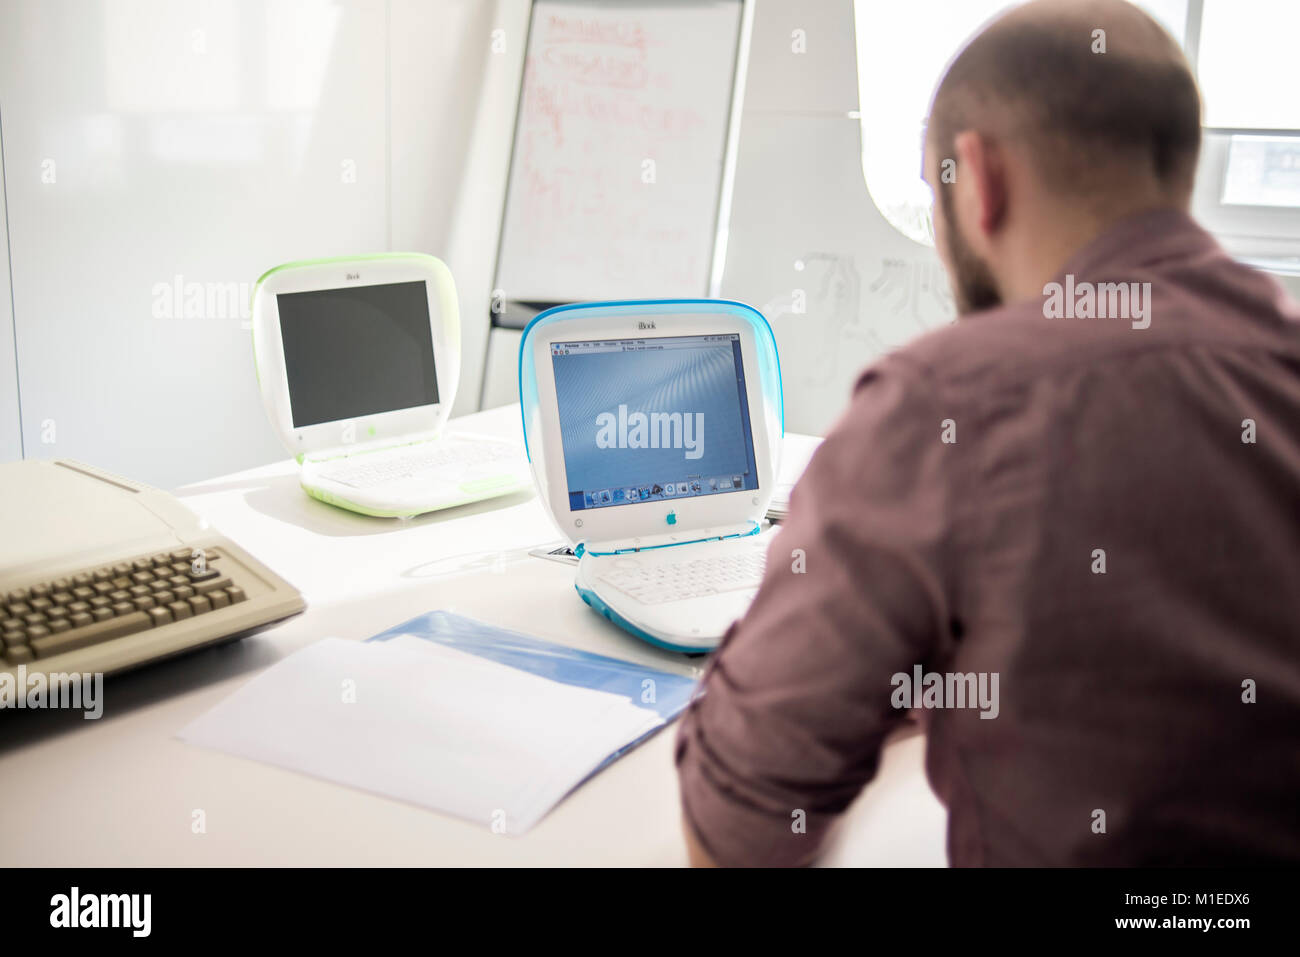 A Member Of Staff Shows Ibook G3 Release Date May 01 With Apple Stock Photo Alamy